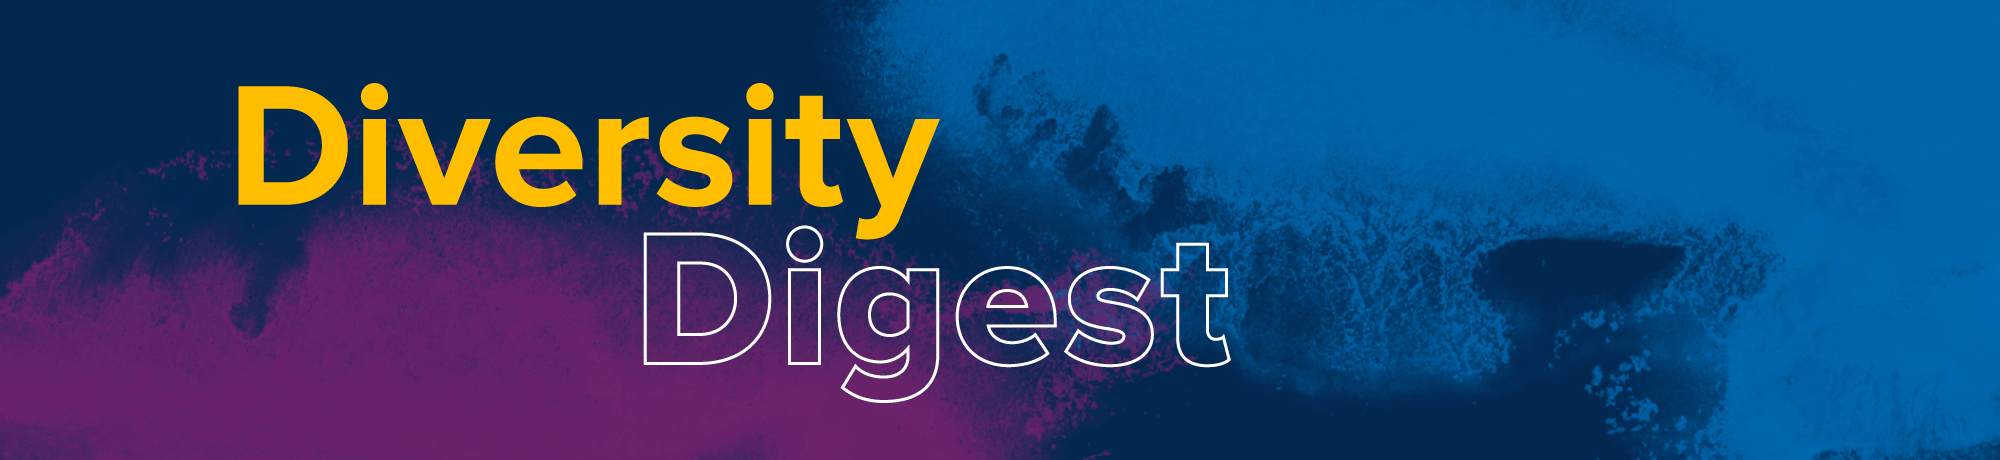 The words "diversity digest" in gold over a tie-dye background featuring purple and blue.